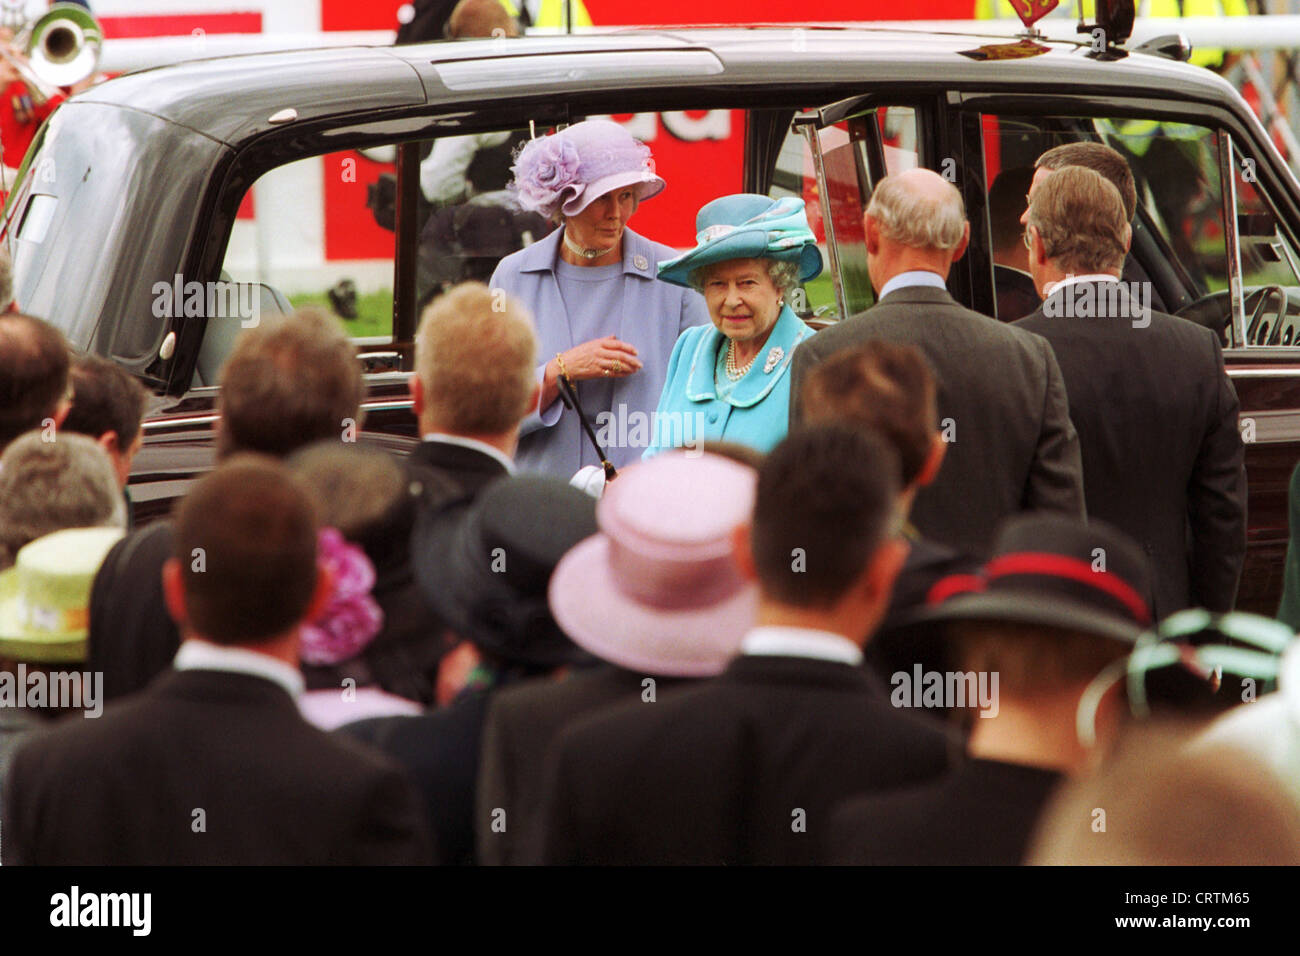 Your Royal Highness Queen Elizabeth arrives at the Epsom Downs Racecourse Stock Photo